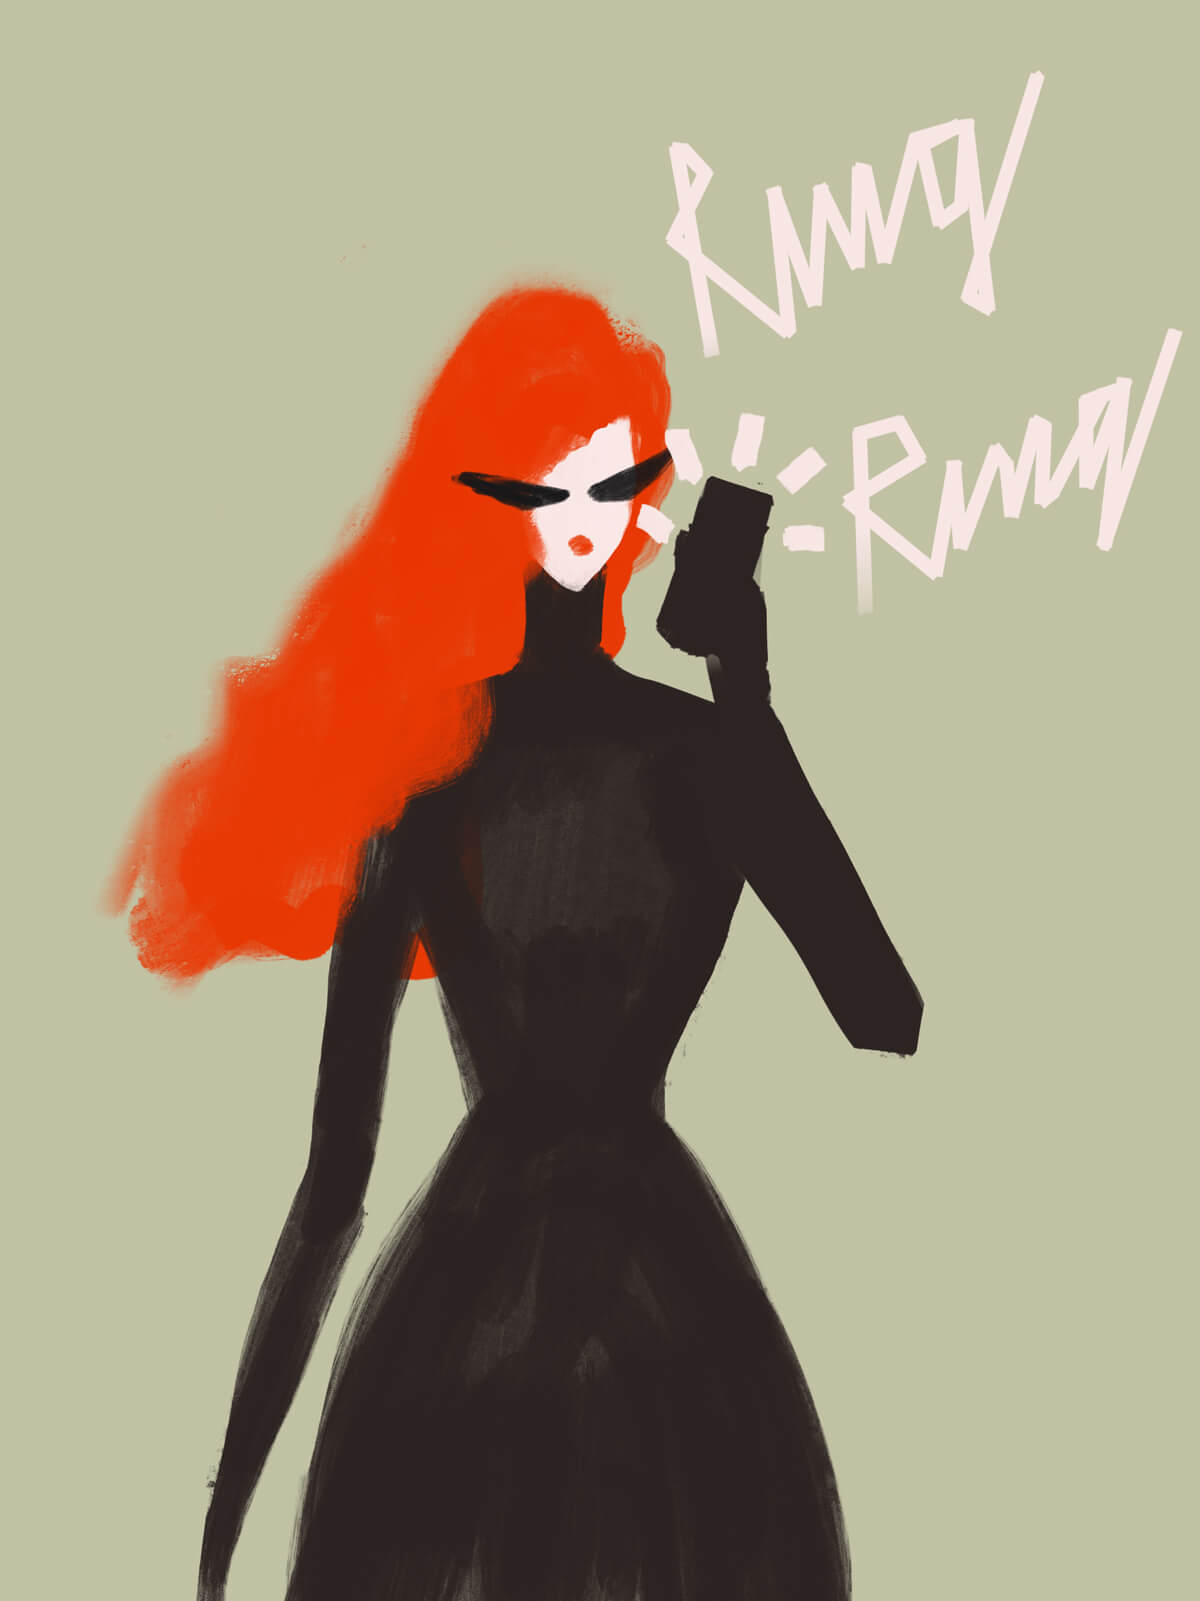 Ring ring getting a call. Woman with red hair in black outfit.